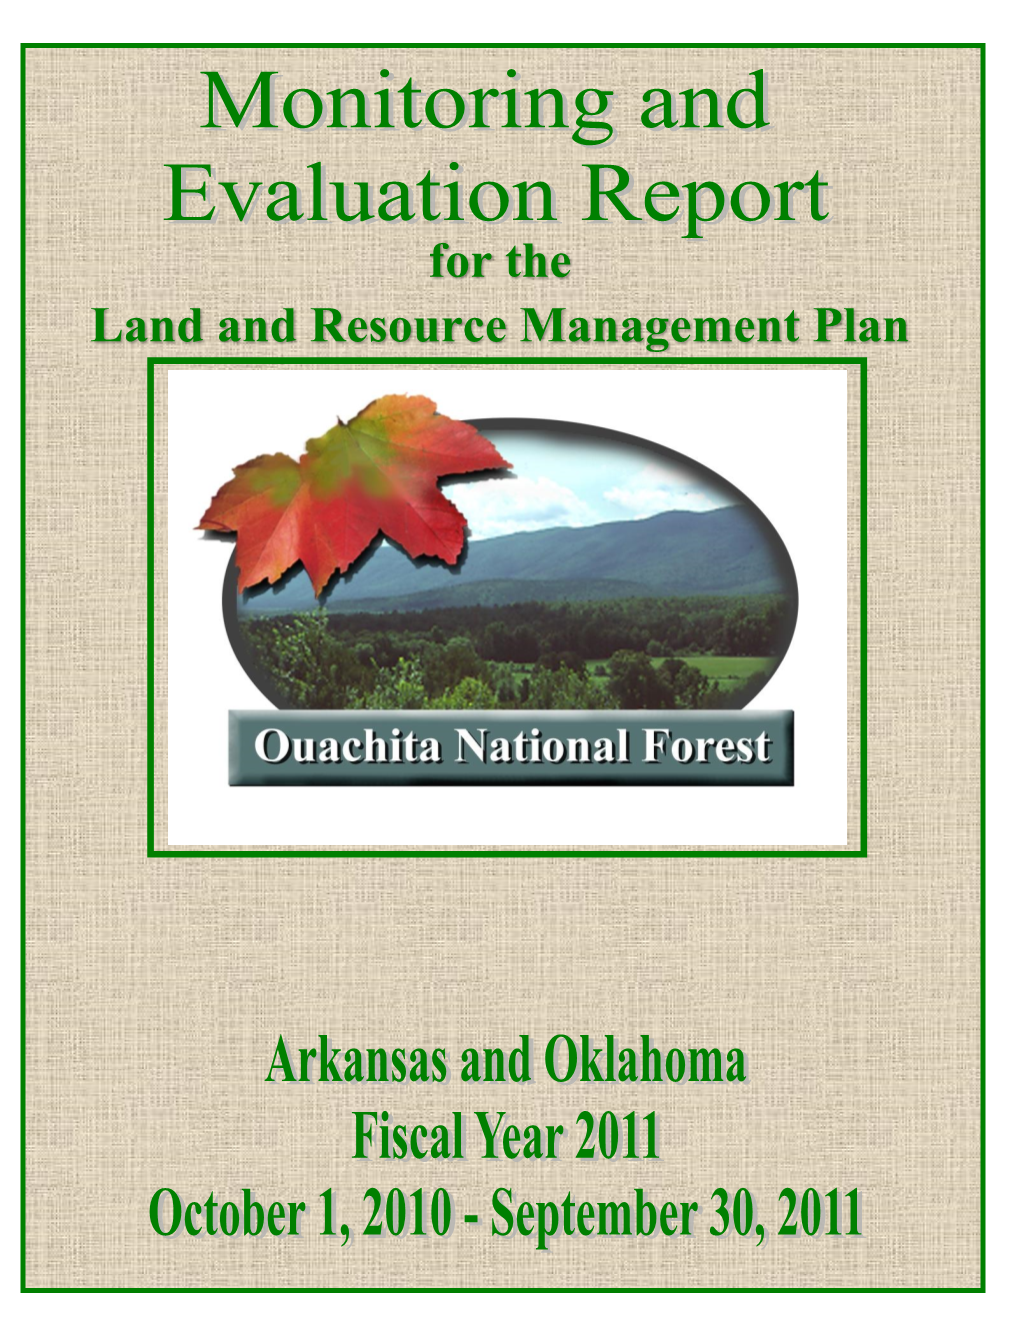 For the Land and Resource Management Plan